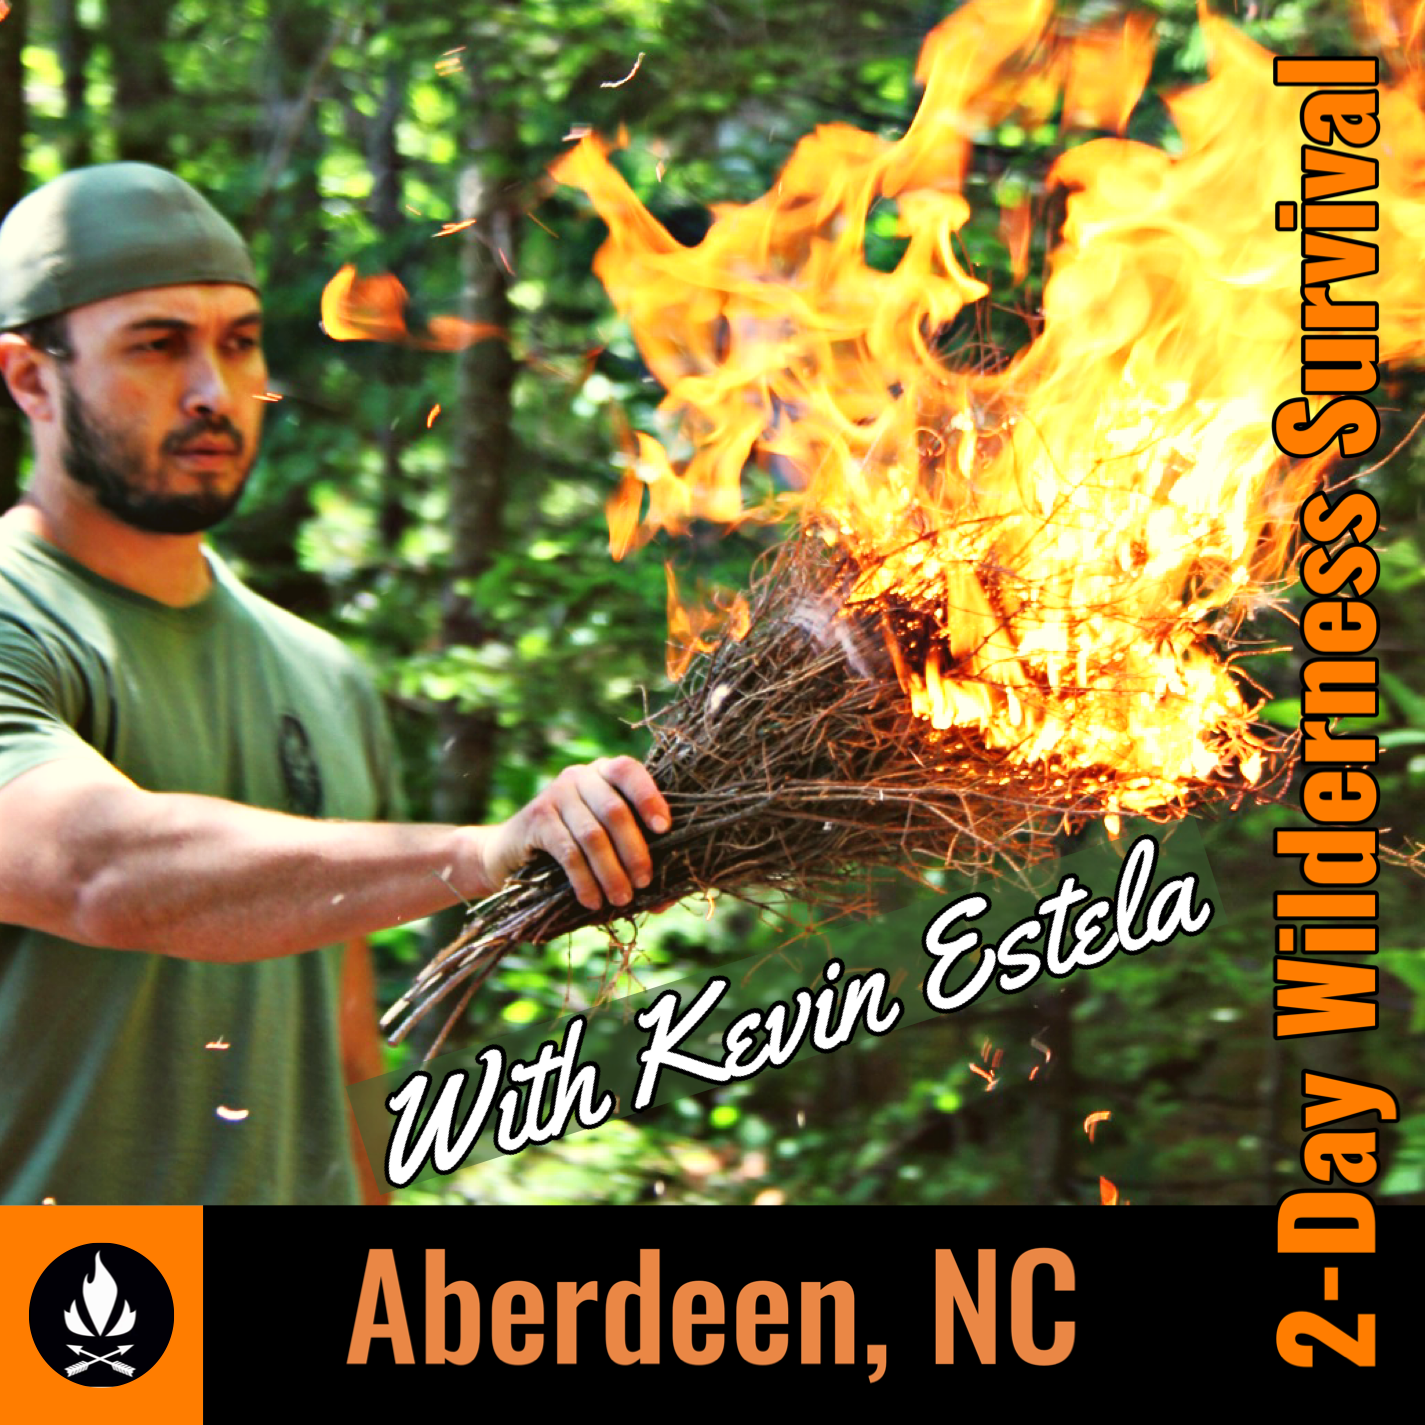 2-Day Wilderness Survival Course with Optional Overnight: 2-3 December 2022 (Aberdeen, NC)